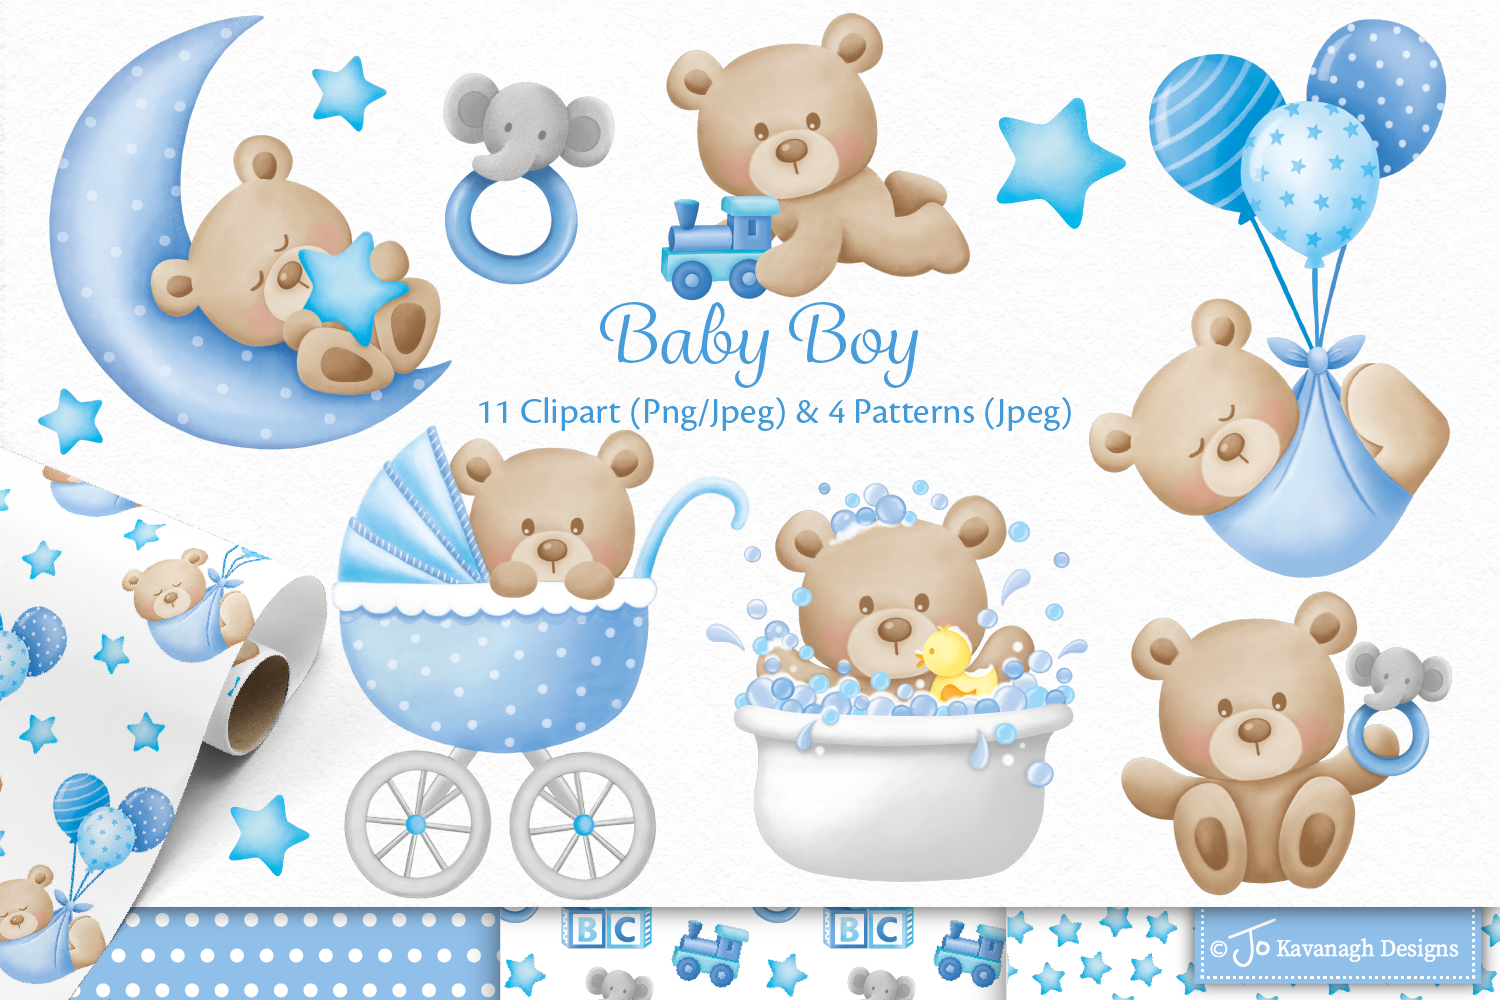 Baby Clipart, Baby Boy Graphics & Illustrations, Baby Bear Clipart